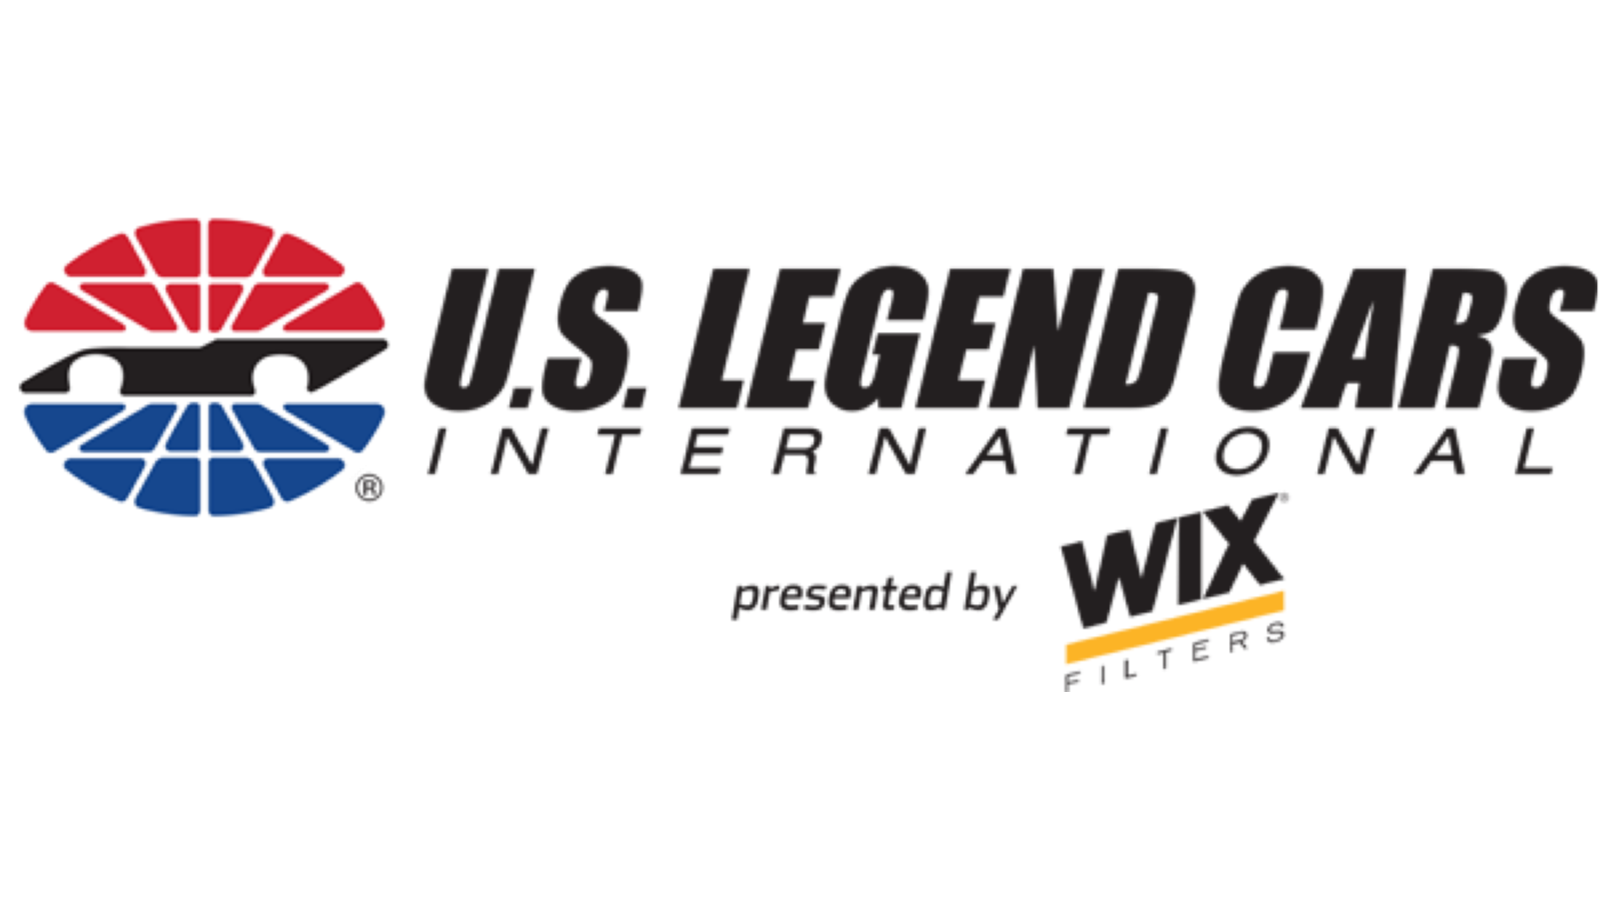 legends-nationals-headed-to-the-bullring-at-lvms-news-media-las